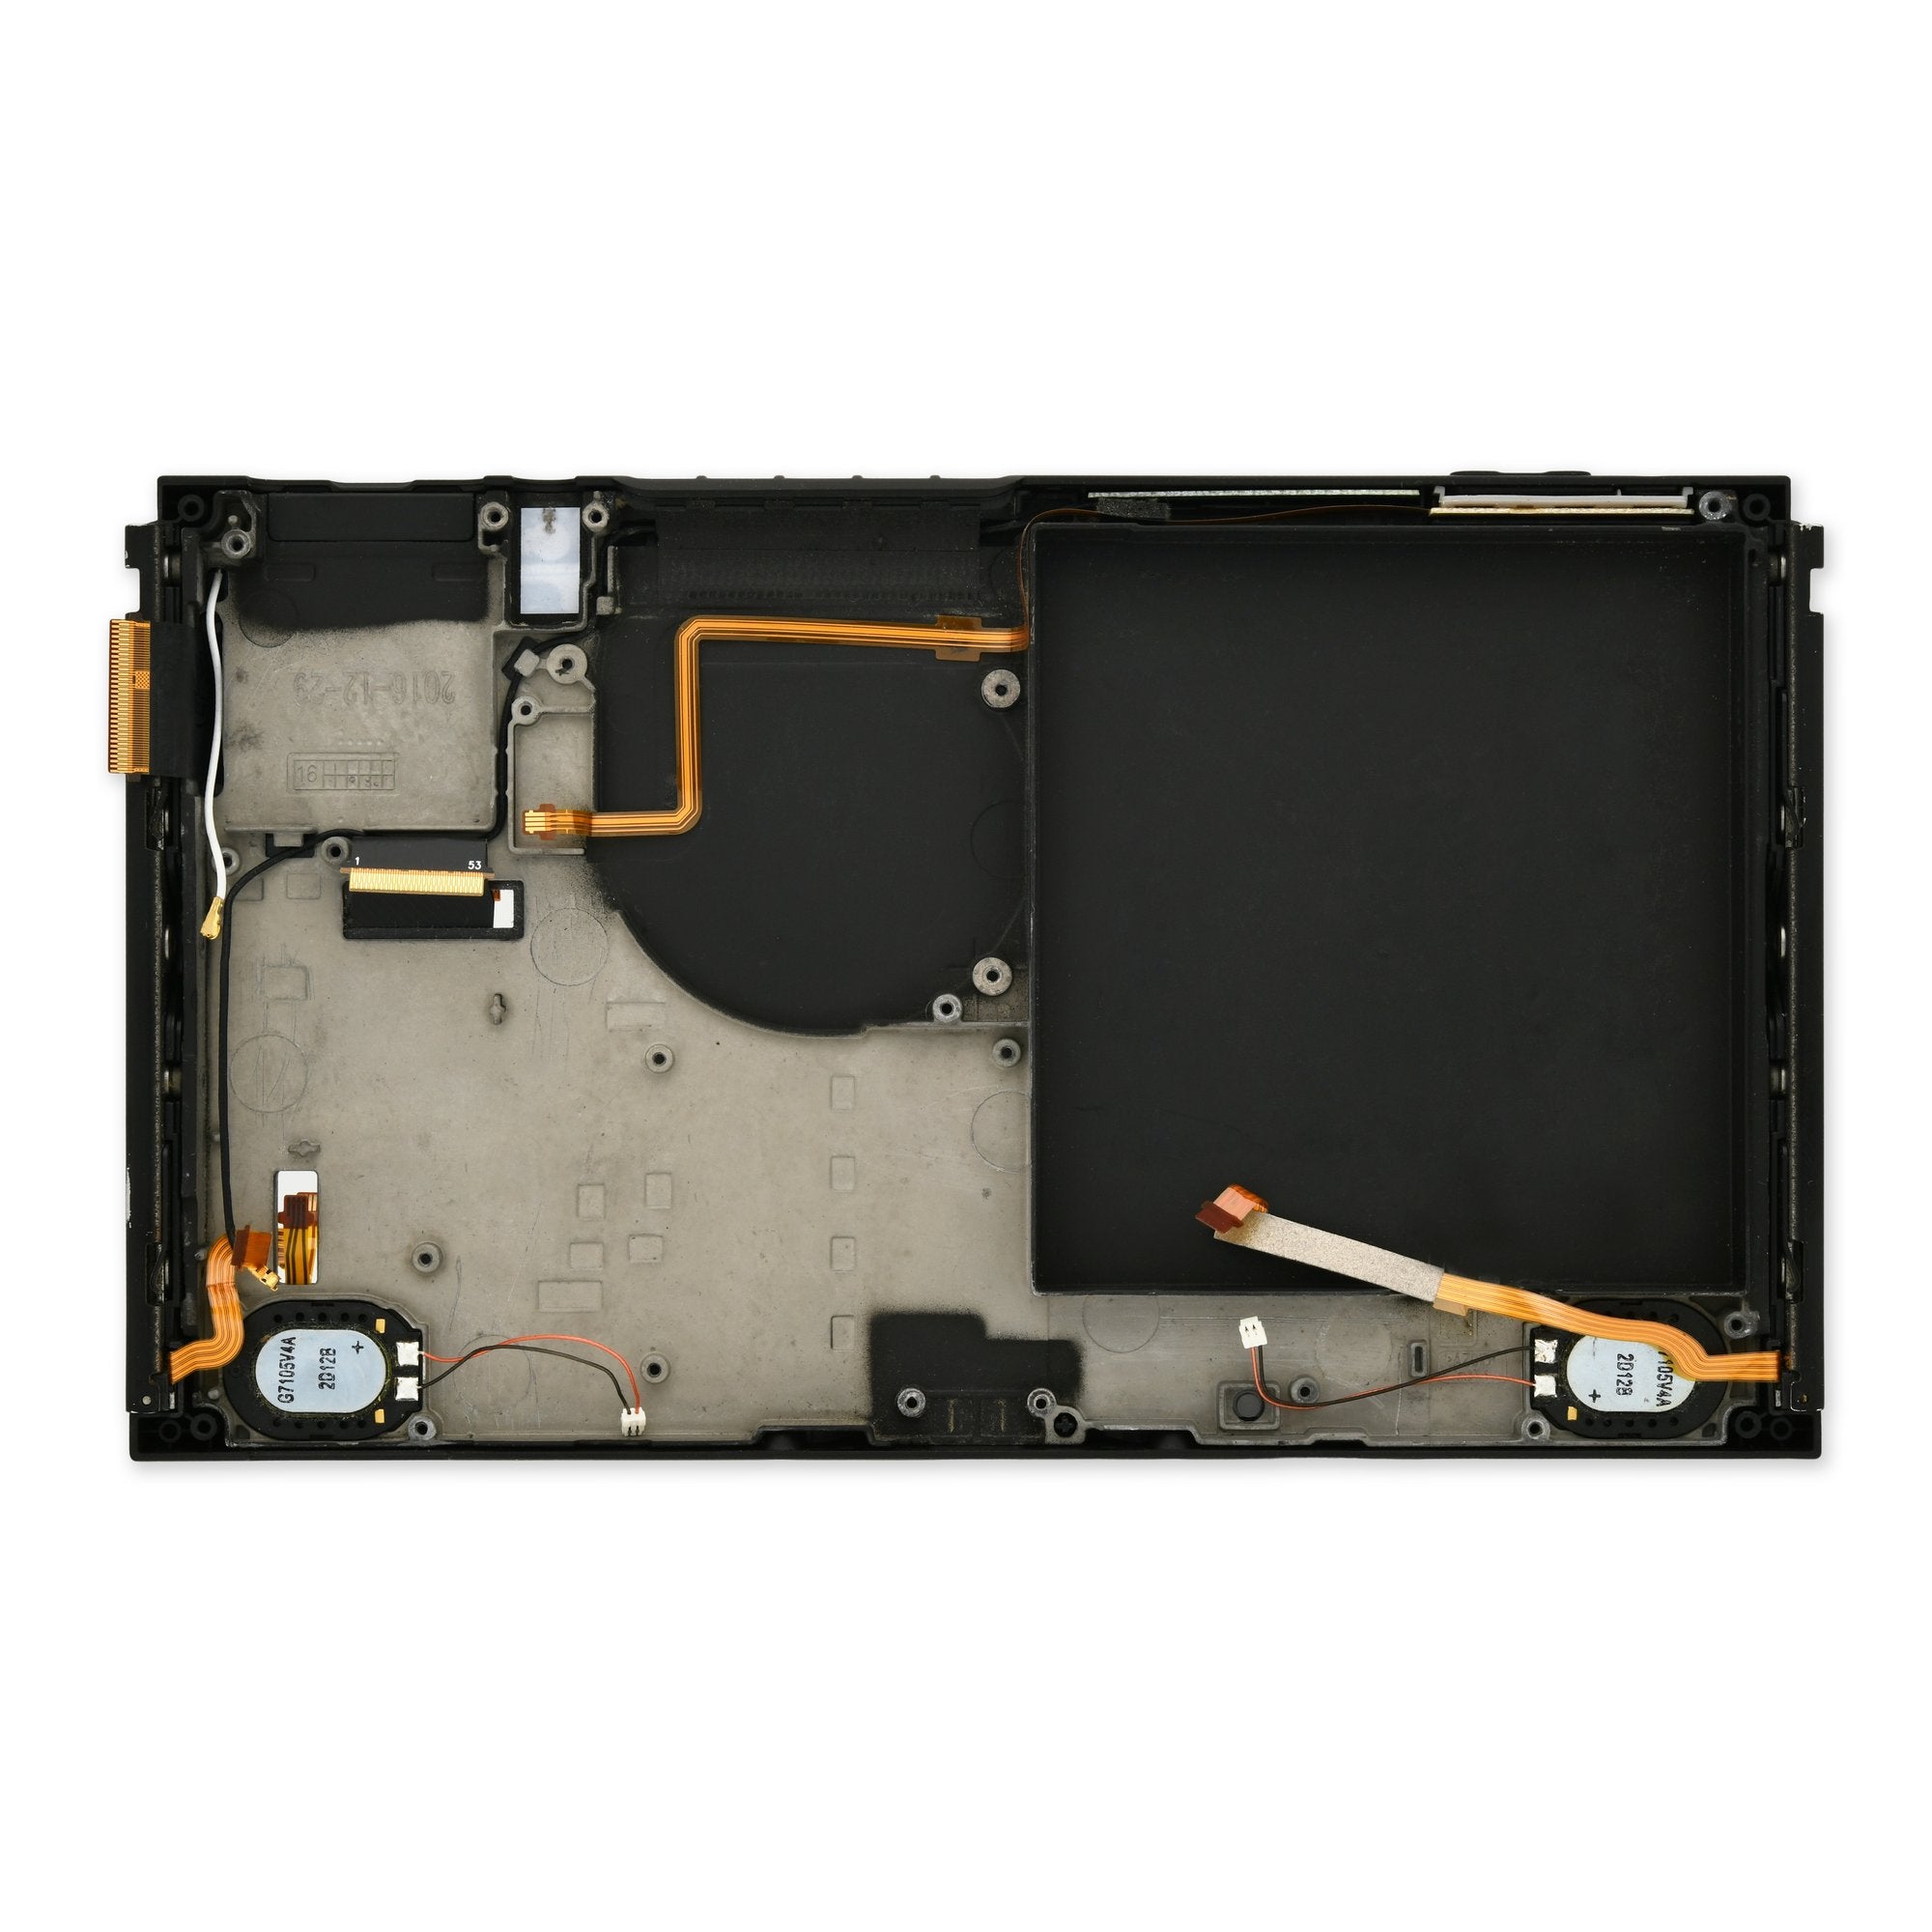 Nintendo Switch Screen Assembly with Speakers and Joy-Con Rails